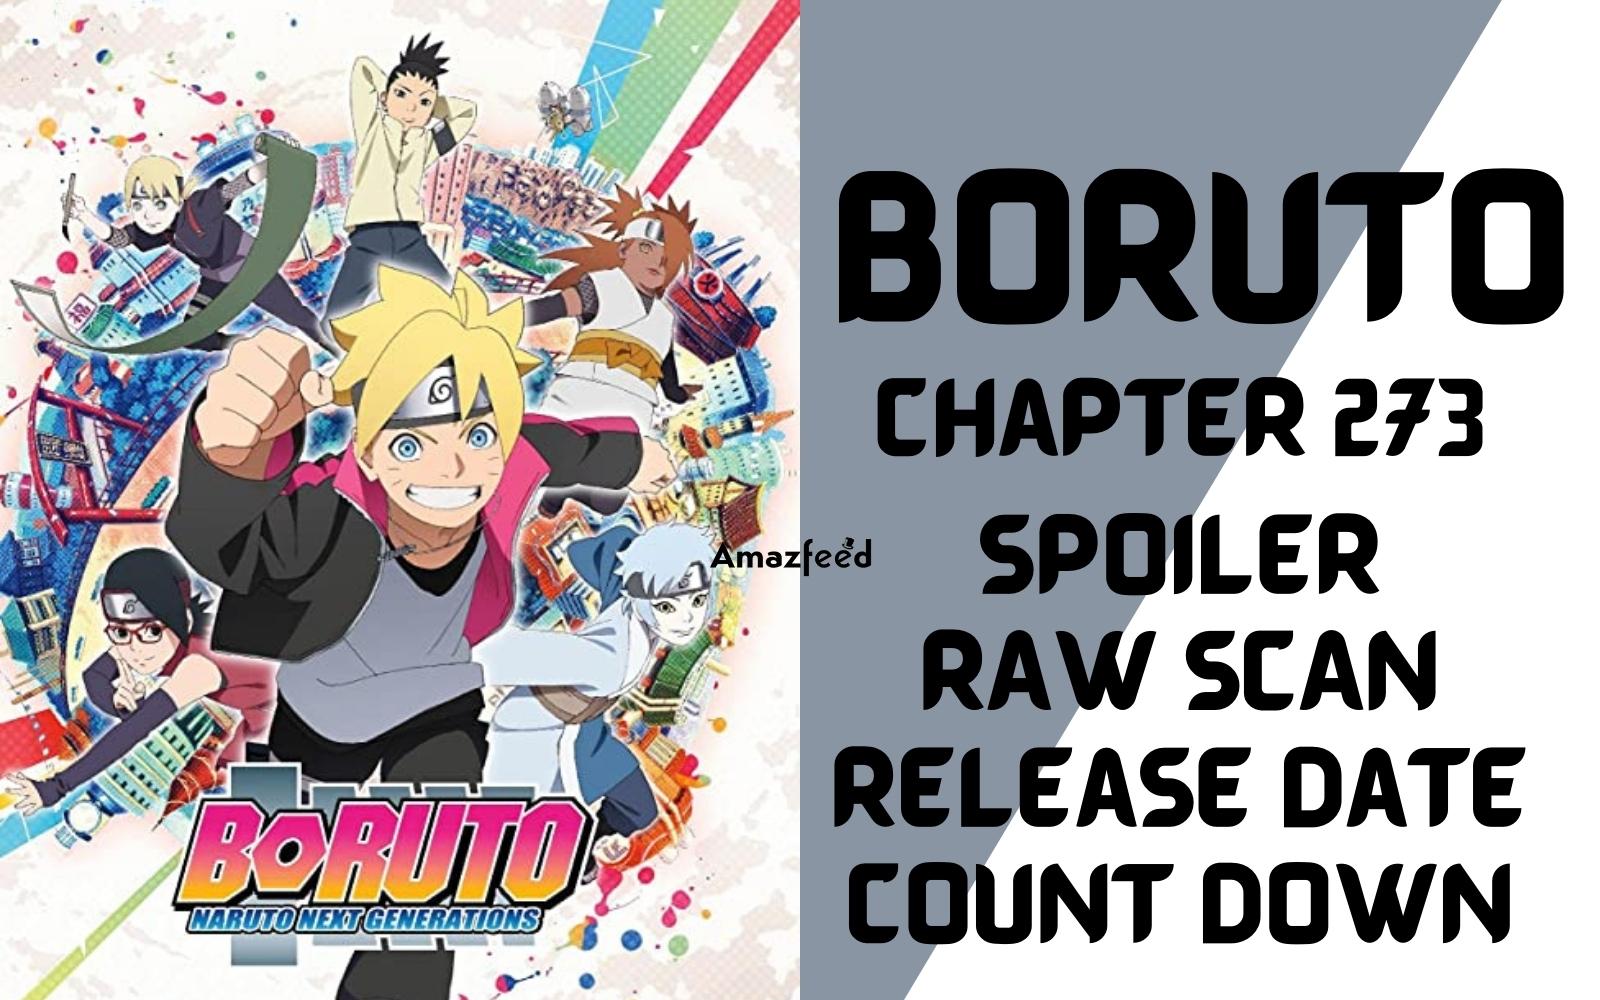 Boruto Episode 273 Spoiler, Release Date and Time, Countdown, Where to Watch, and More